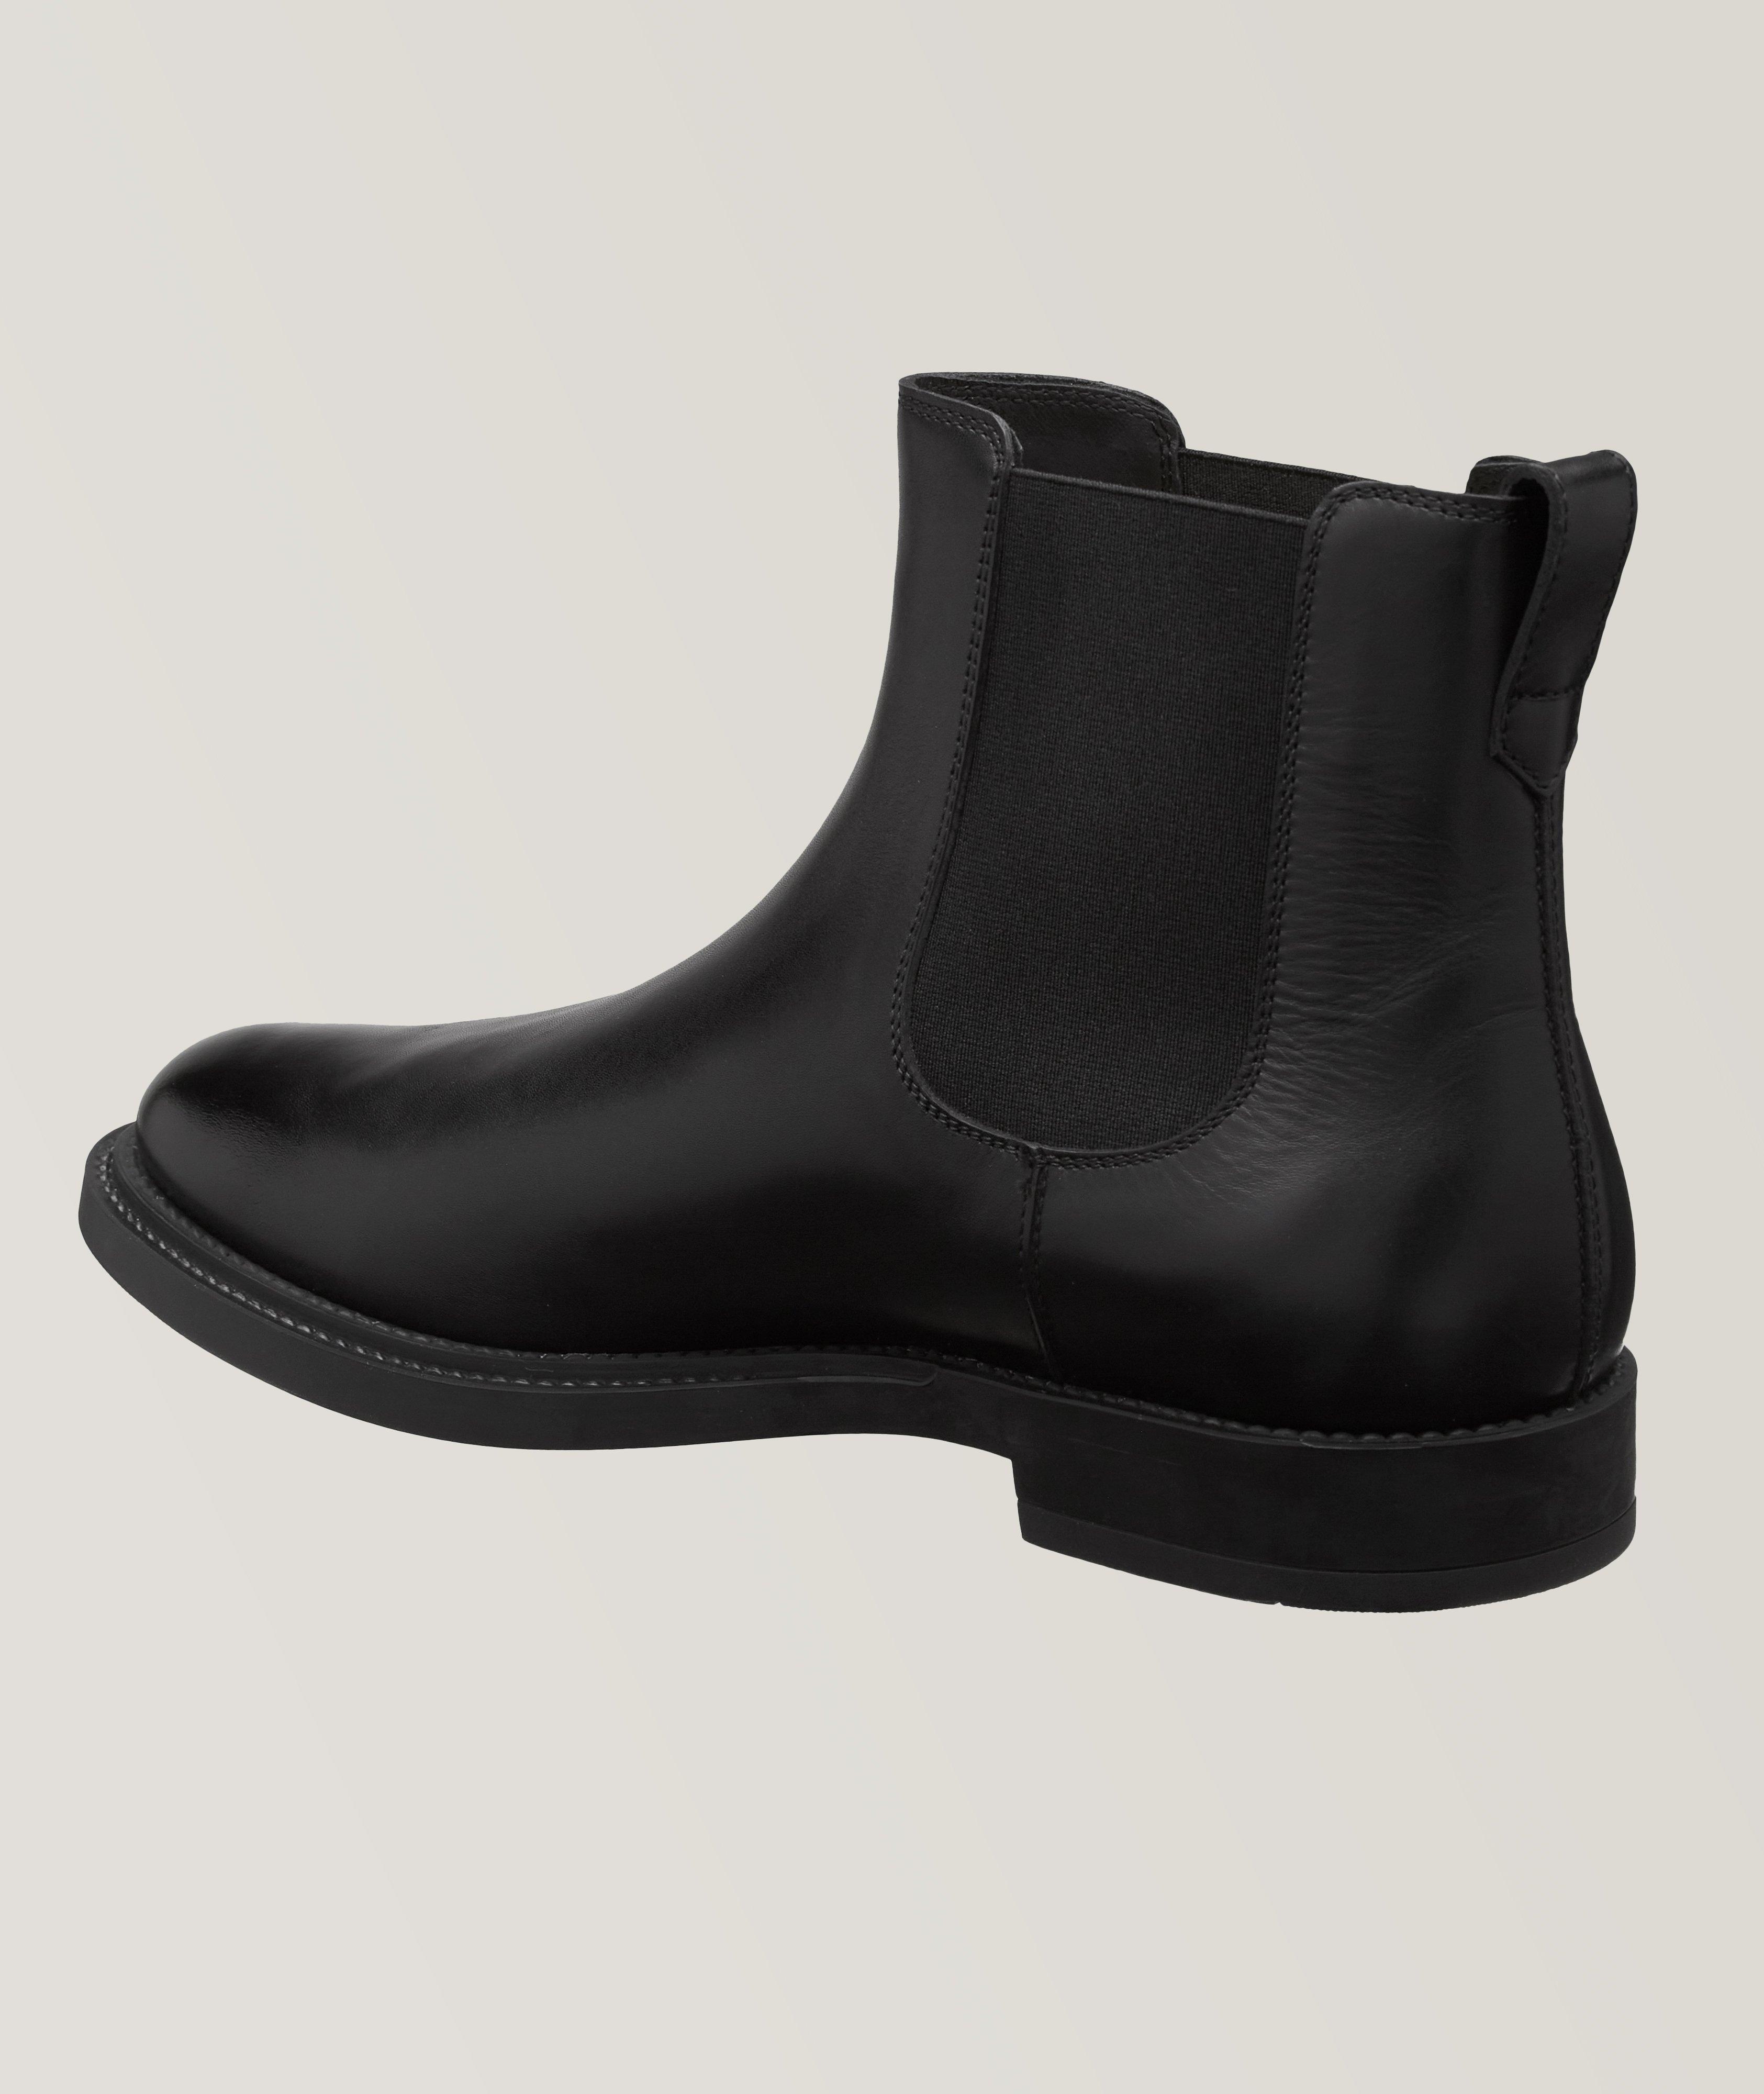 Leather Chelsea Boots image 1